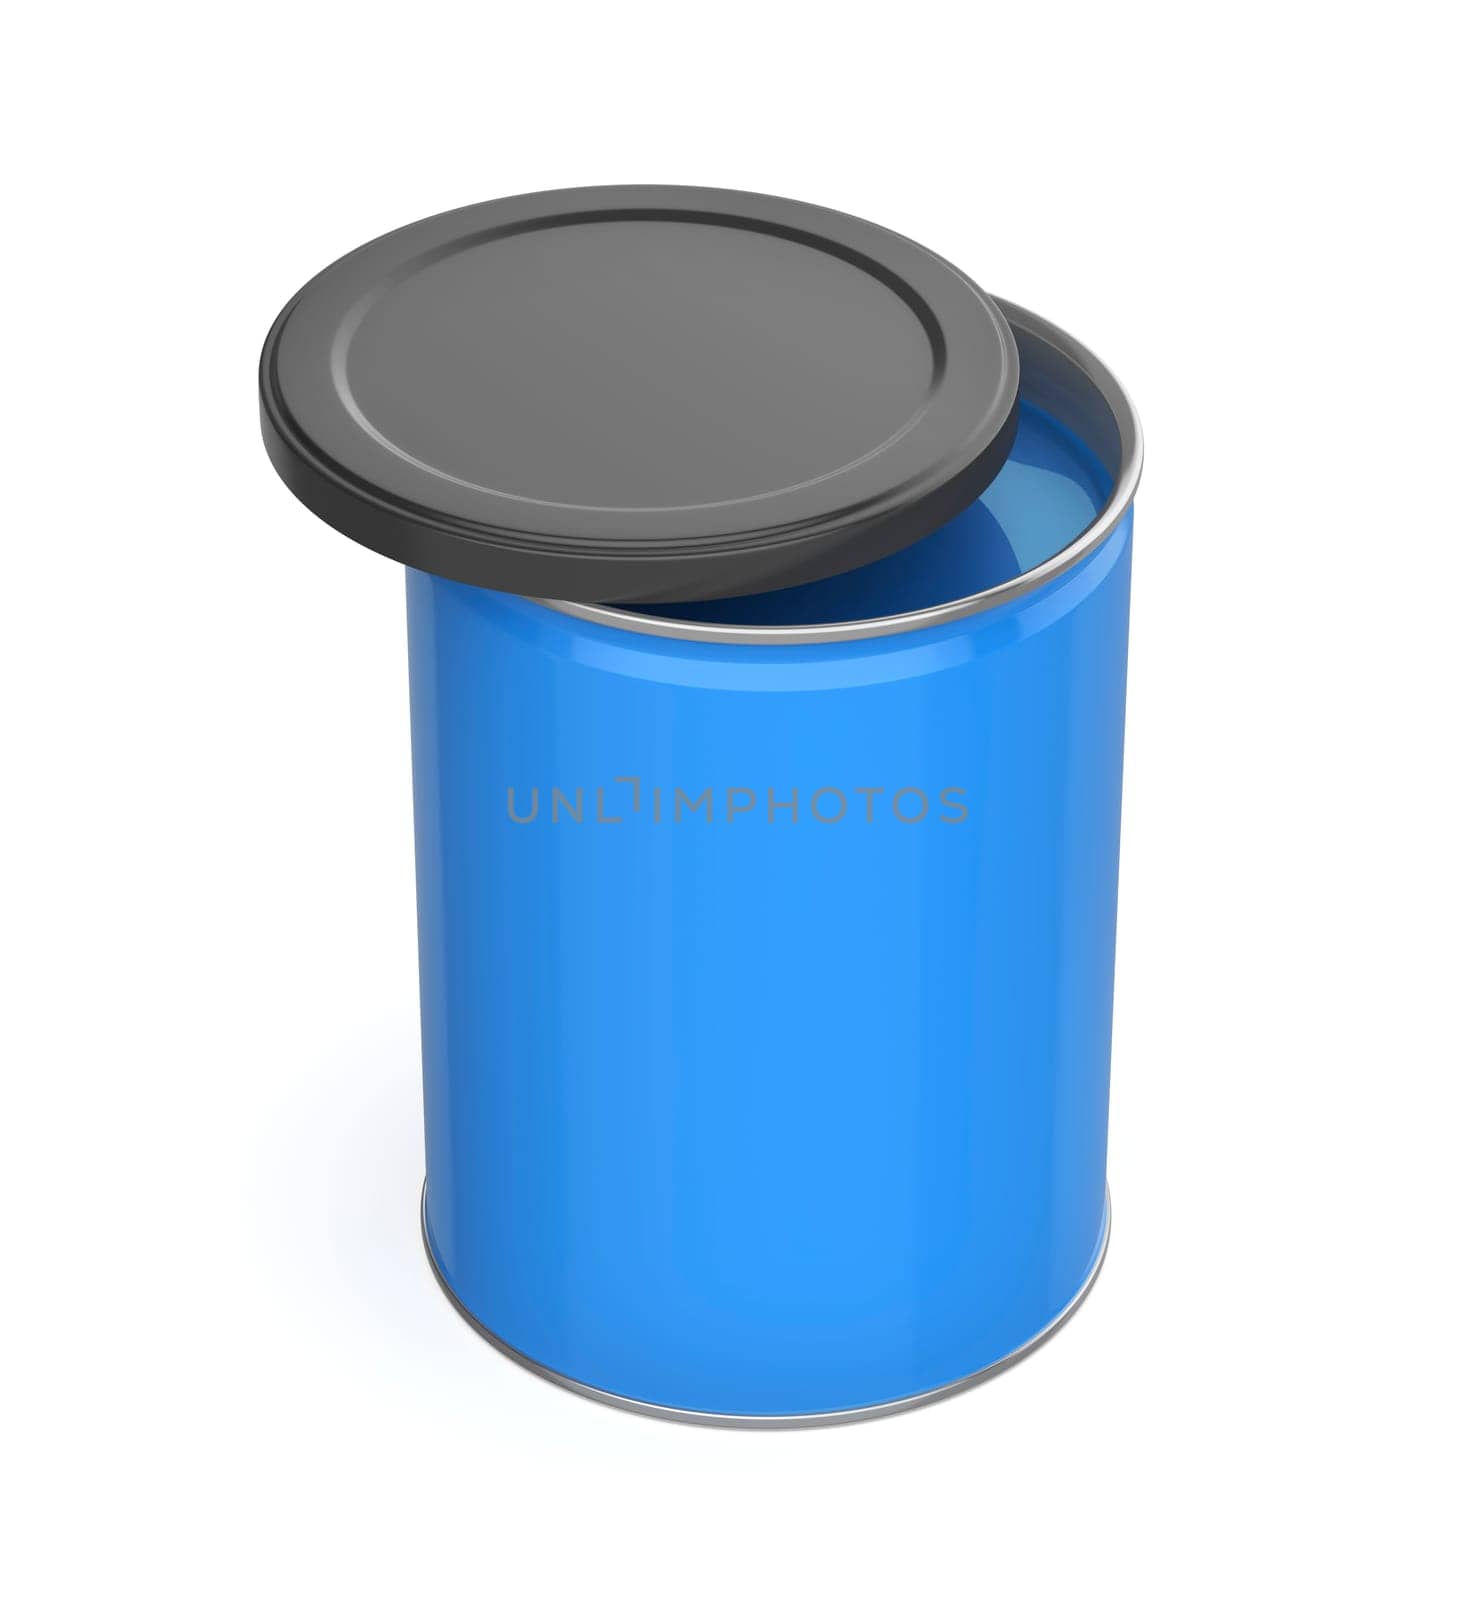 Metal can with blue paint by magraphics